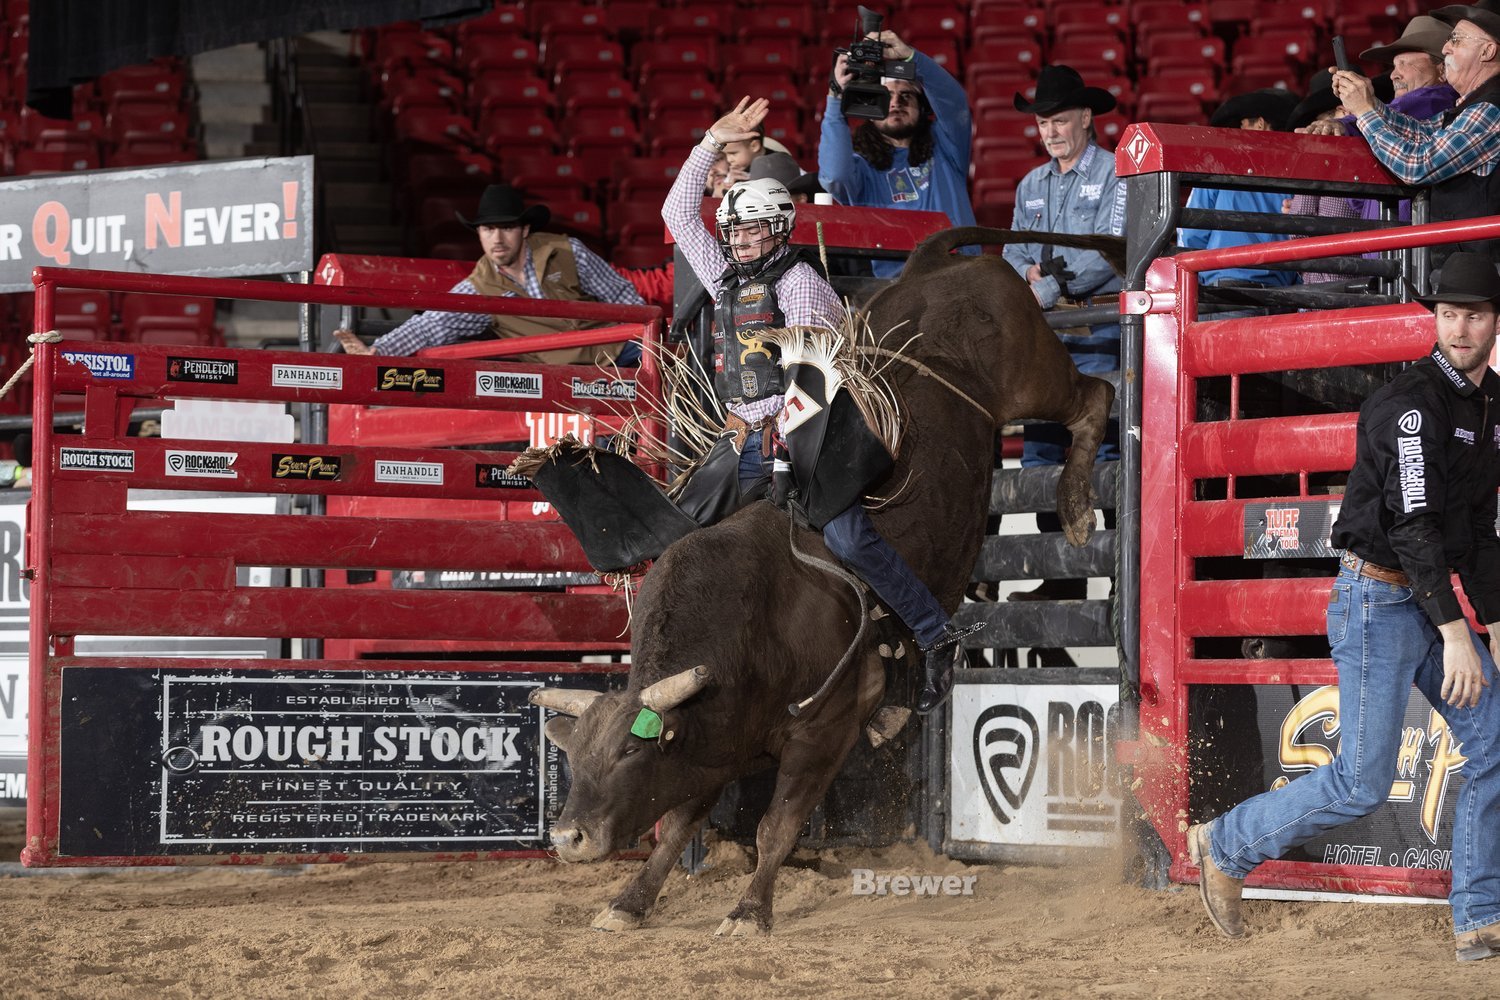 Ultimate Bullfighters announces 2022 Fort Worth residency at the